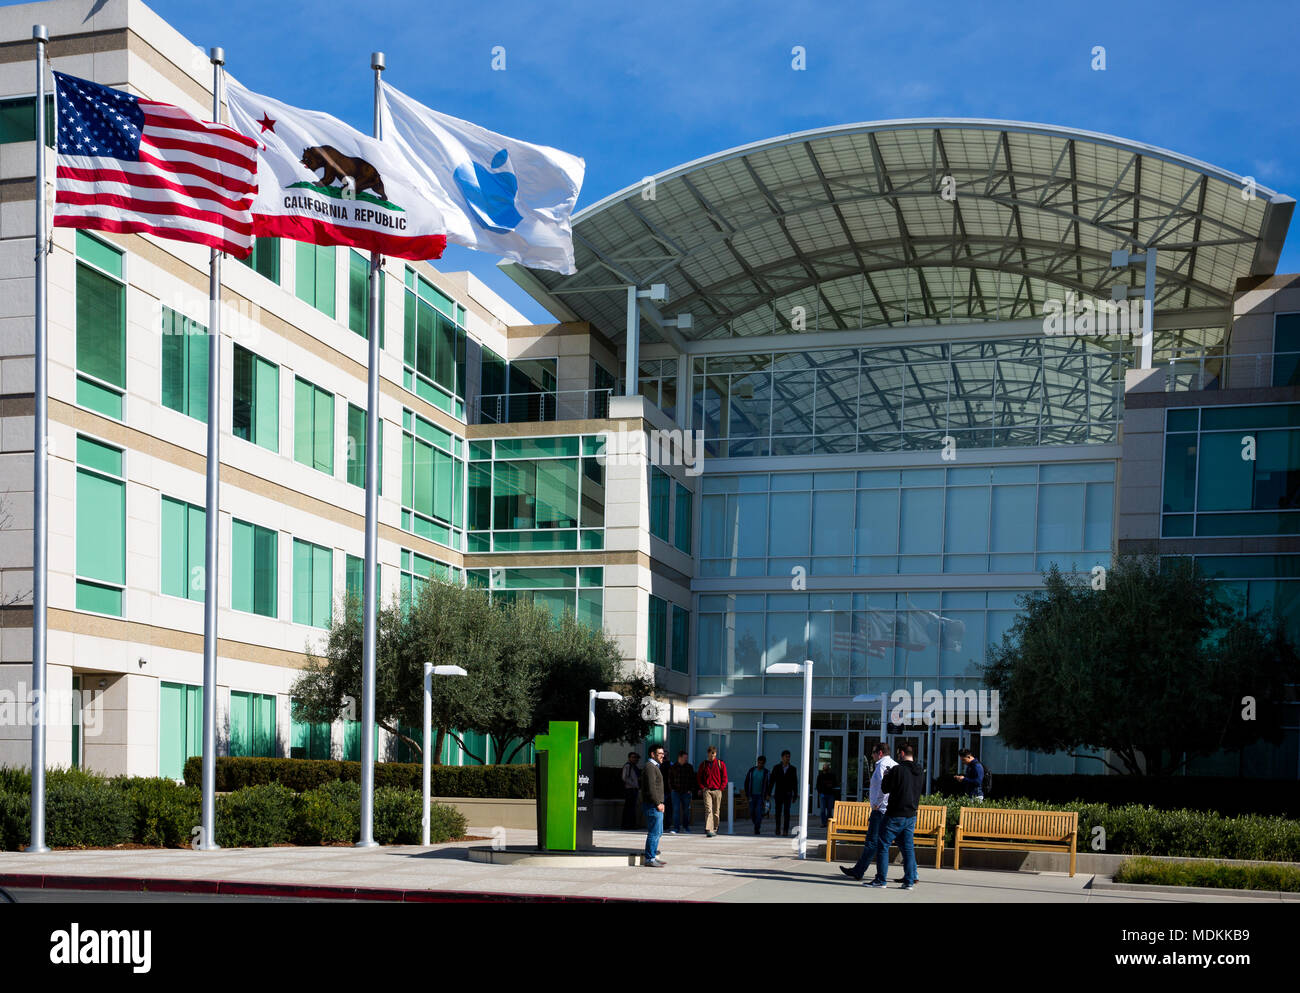 Apple Infinite Loop, Cupertino, California, United States (USA) - January 30, 2017: Apple stuff and visitors in front of the Apple world headquarters Stock Photo